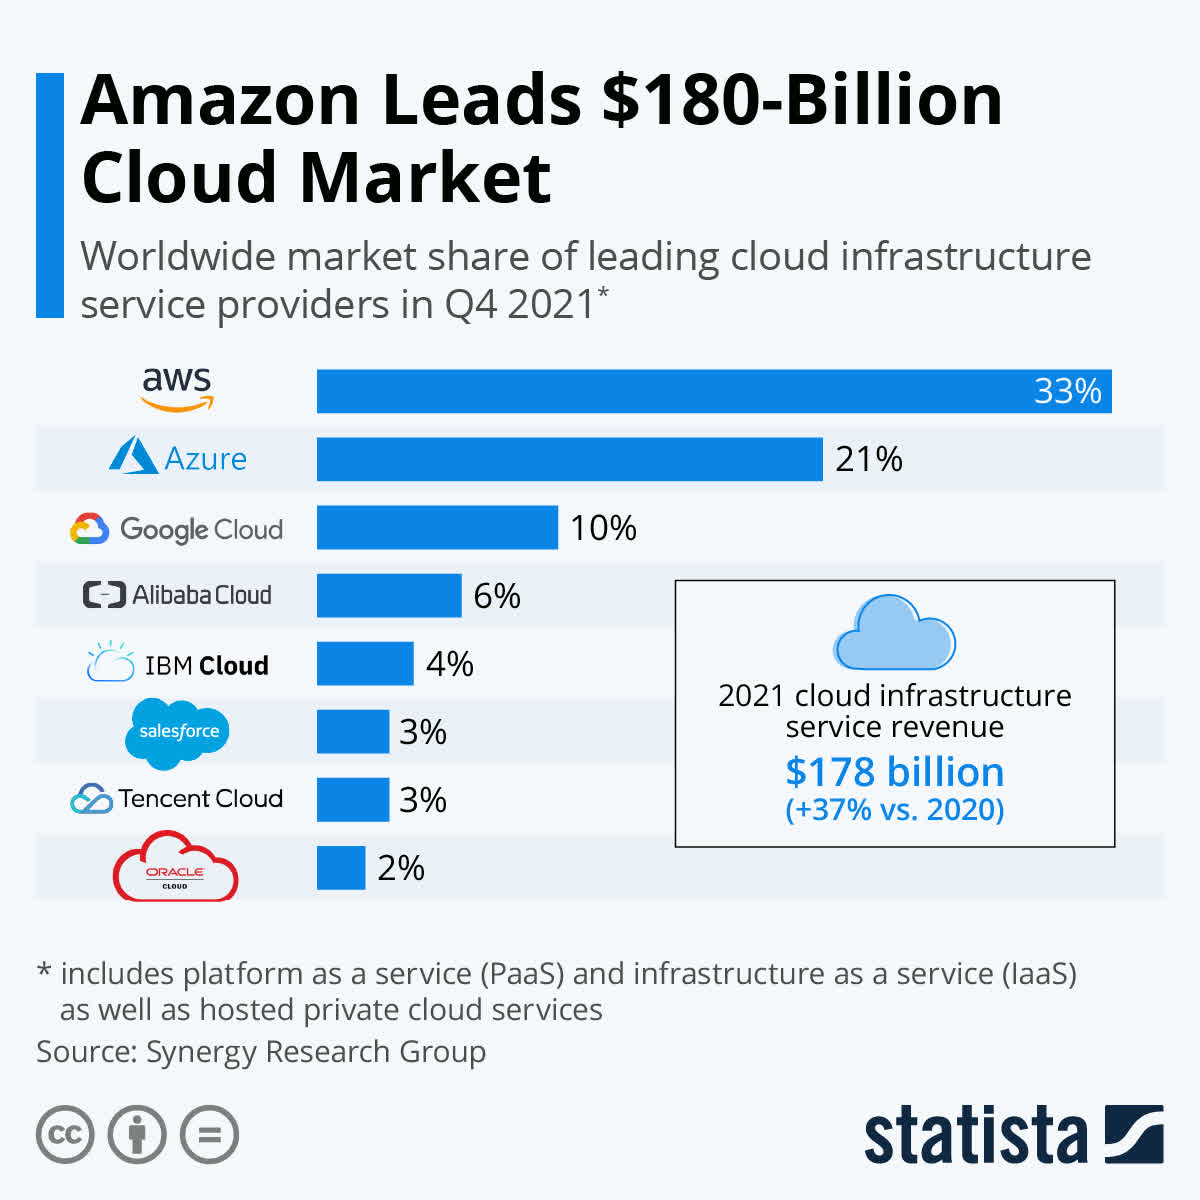 https://www.statista.com/chart/18819/worldwide-market-share-of-leading-cloud-infrastructure-service-providers/